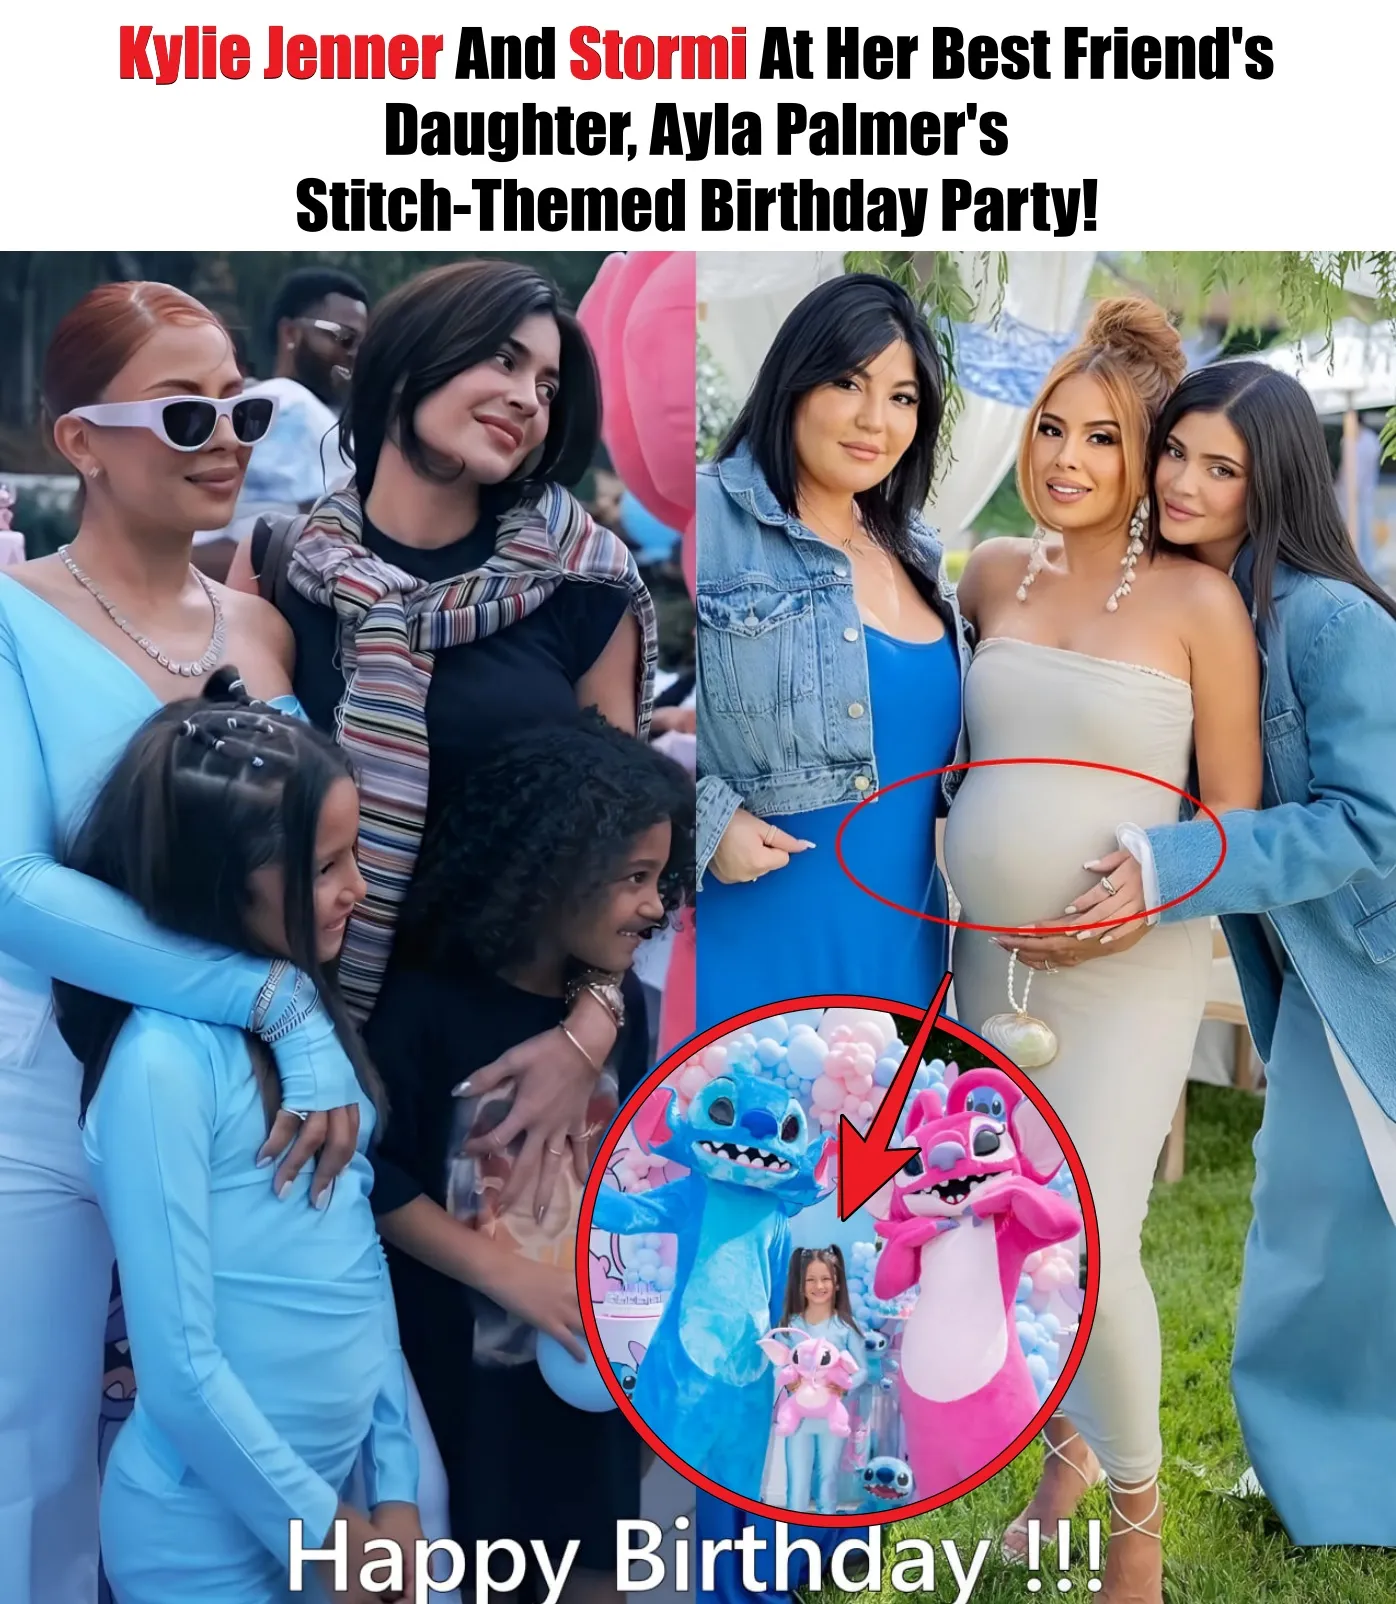 Cover Image for Kylie Jenner And Stormi At Her Best Friend’s Daughter, Ayla Palmer’s Stitch-Themed Birthday Party!